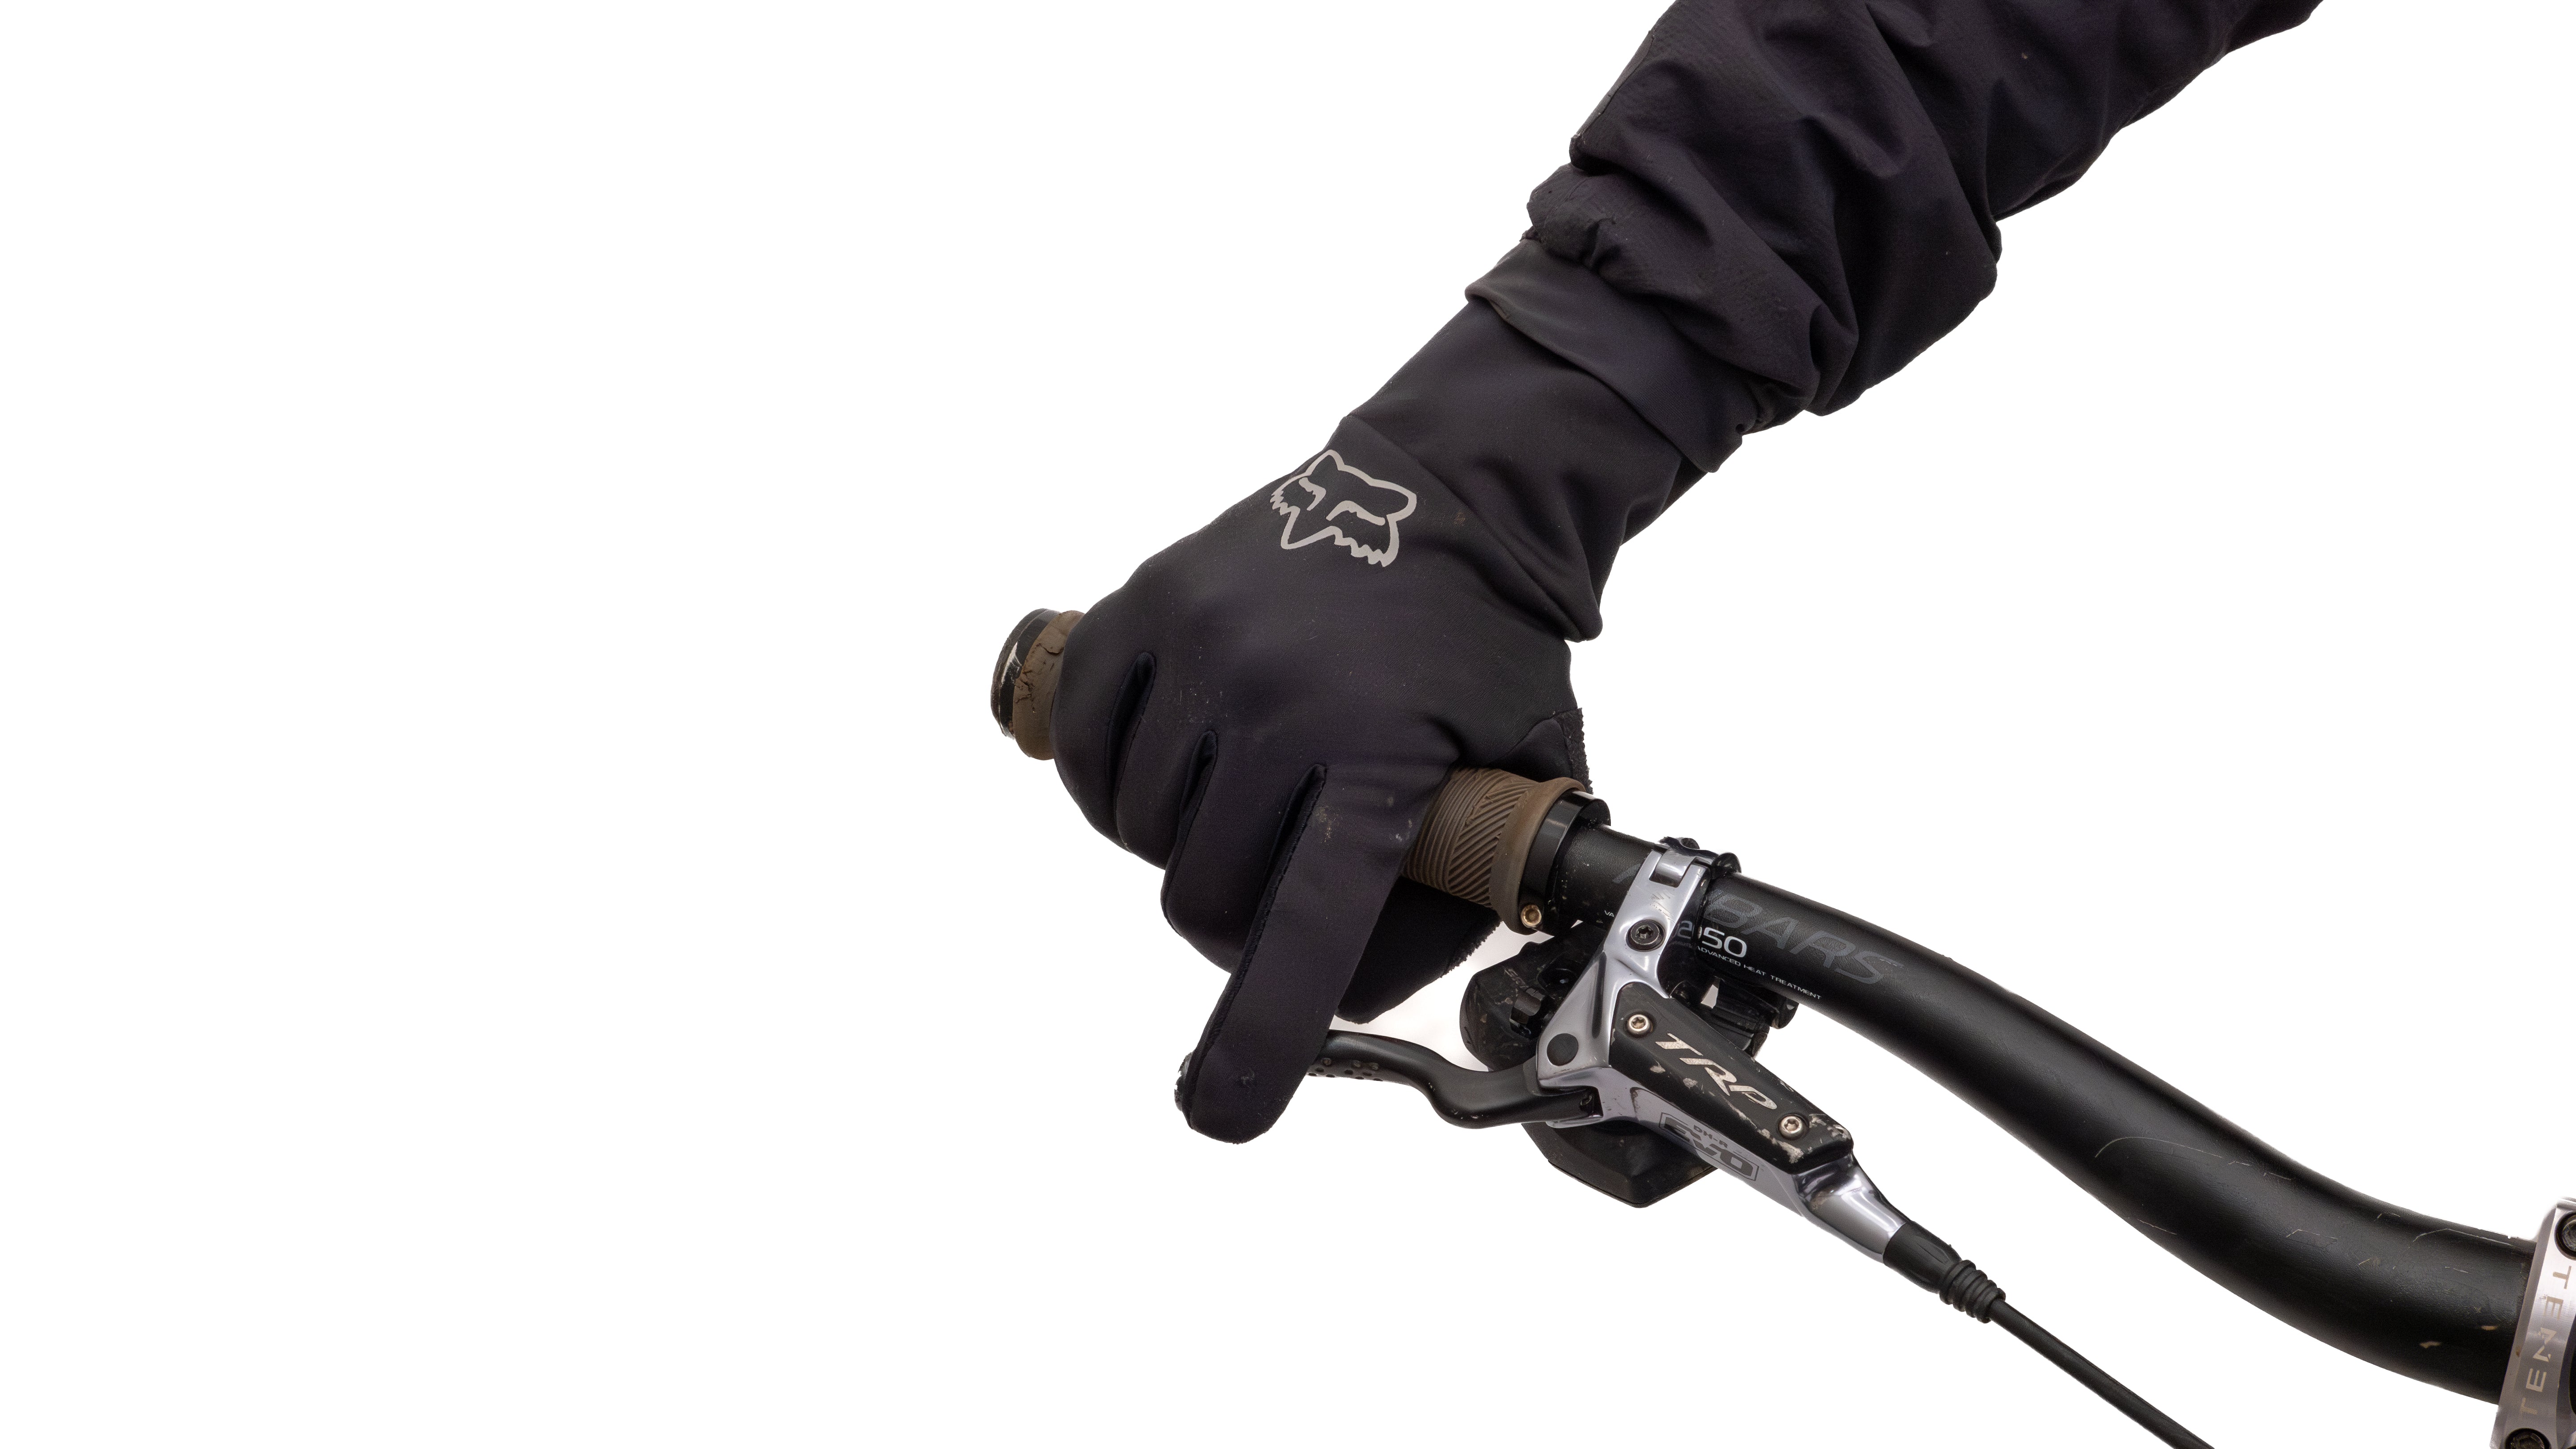 Winter Glove Review // Best MTB Gloves for Cold Weather - Fanatik